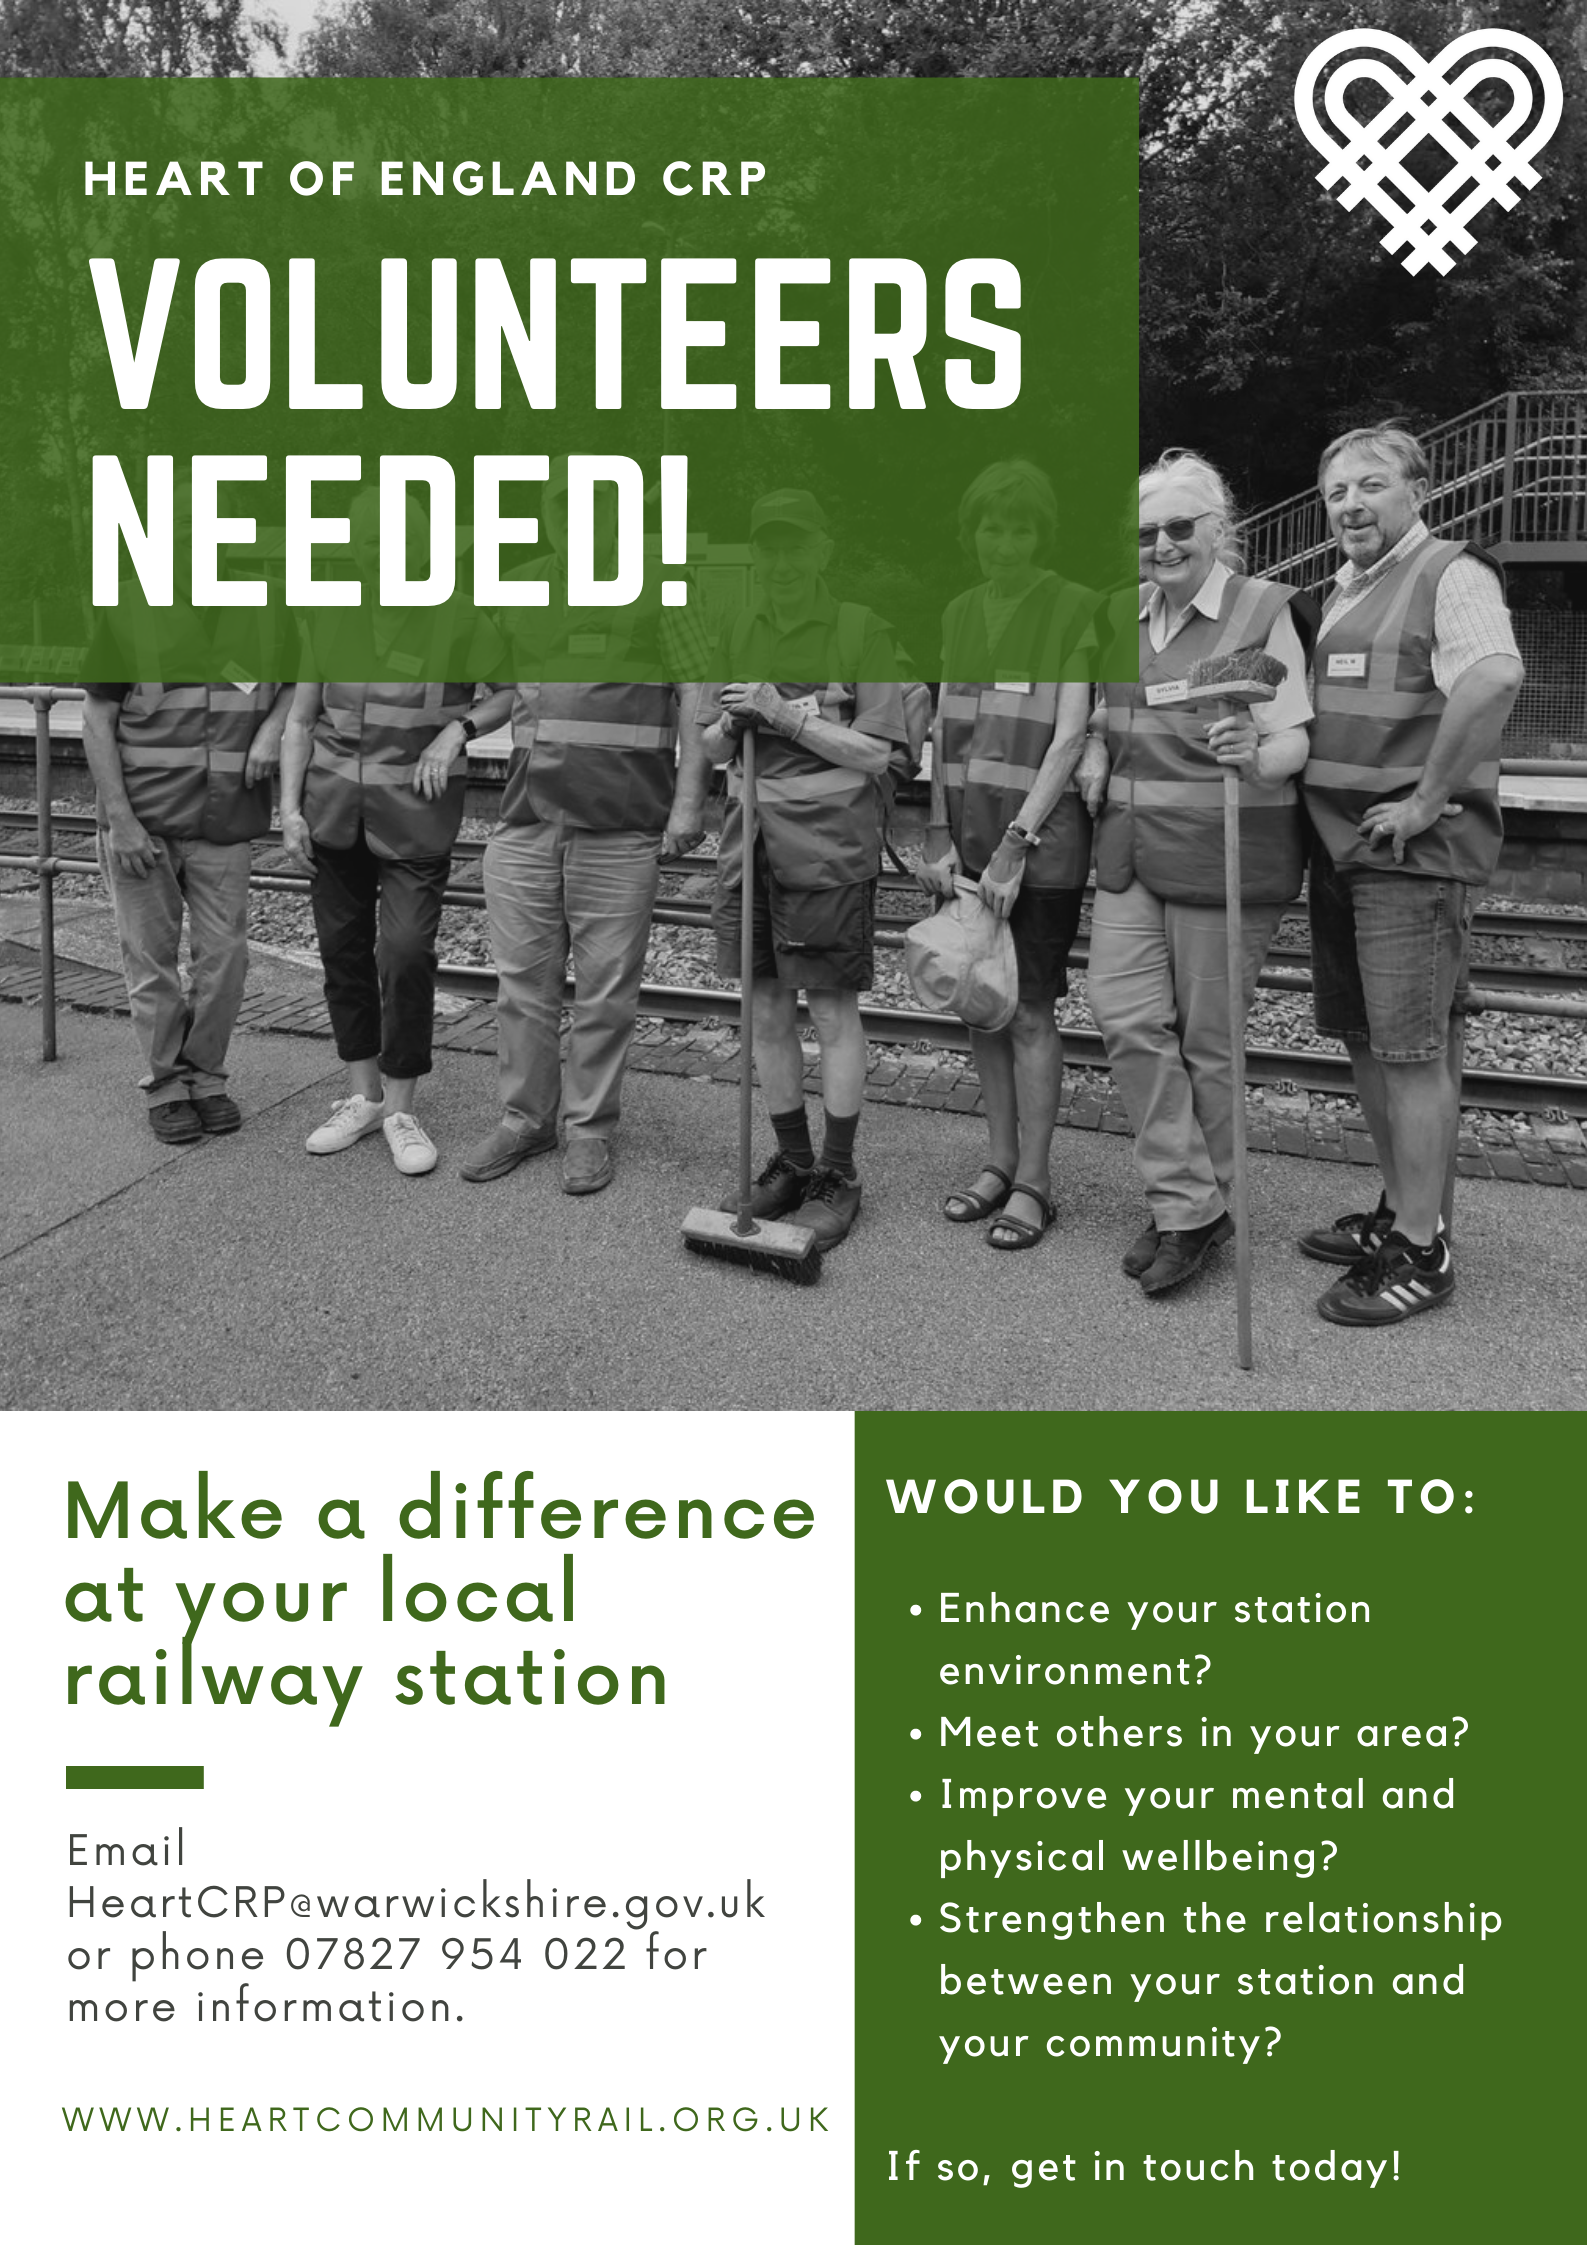 Black and white photo of 6 volunteers in high vis vests, leaning on tools at a train station.  Text in white and green about station adoption.